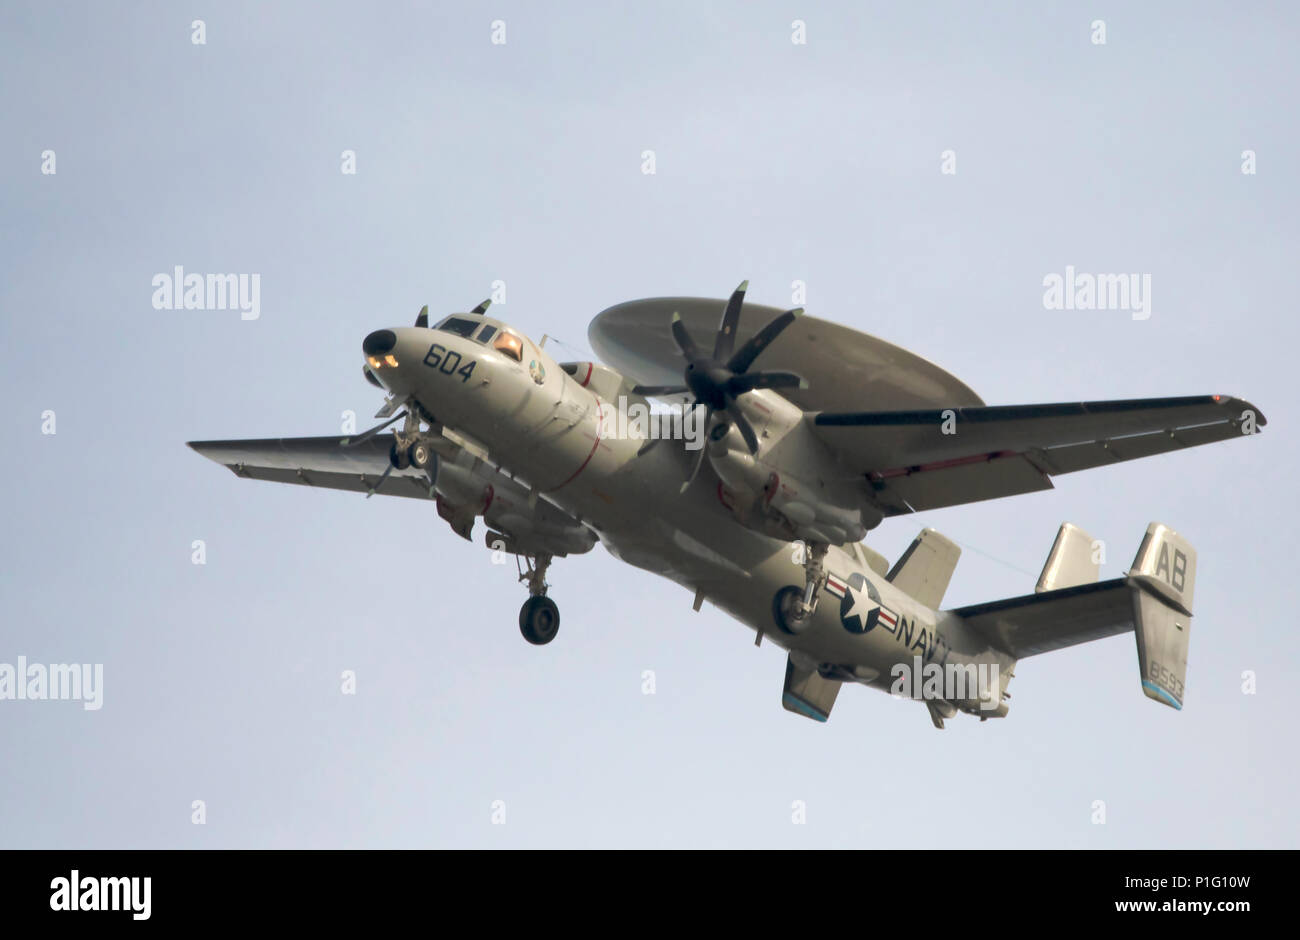 Bossier City, La., U.S.A., Jan. 21, 2017: A U.S. Navy E2C Hawkeye airborne early warning and command and control aircraft approaches Barksdale Air For Stock Photo